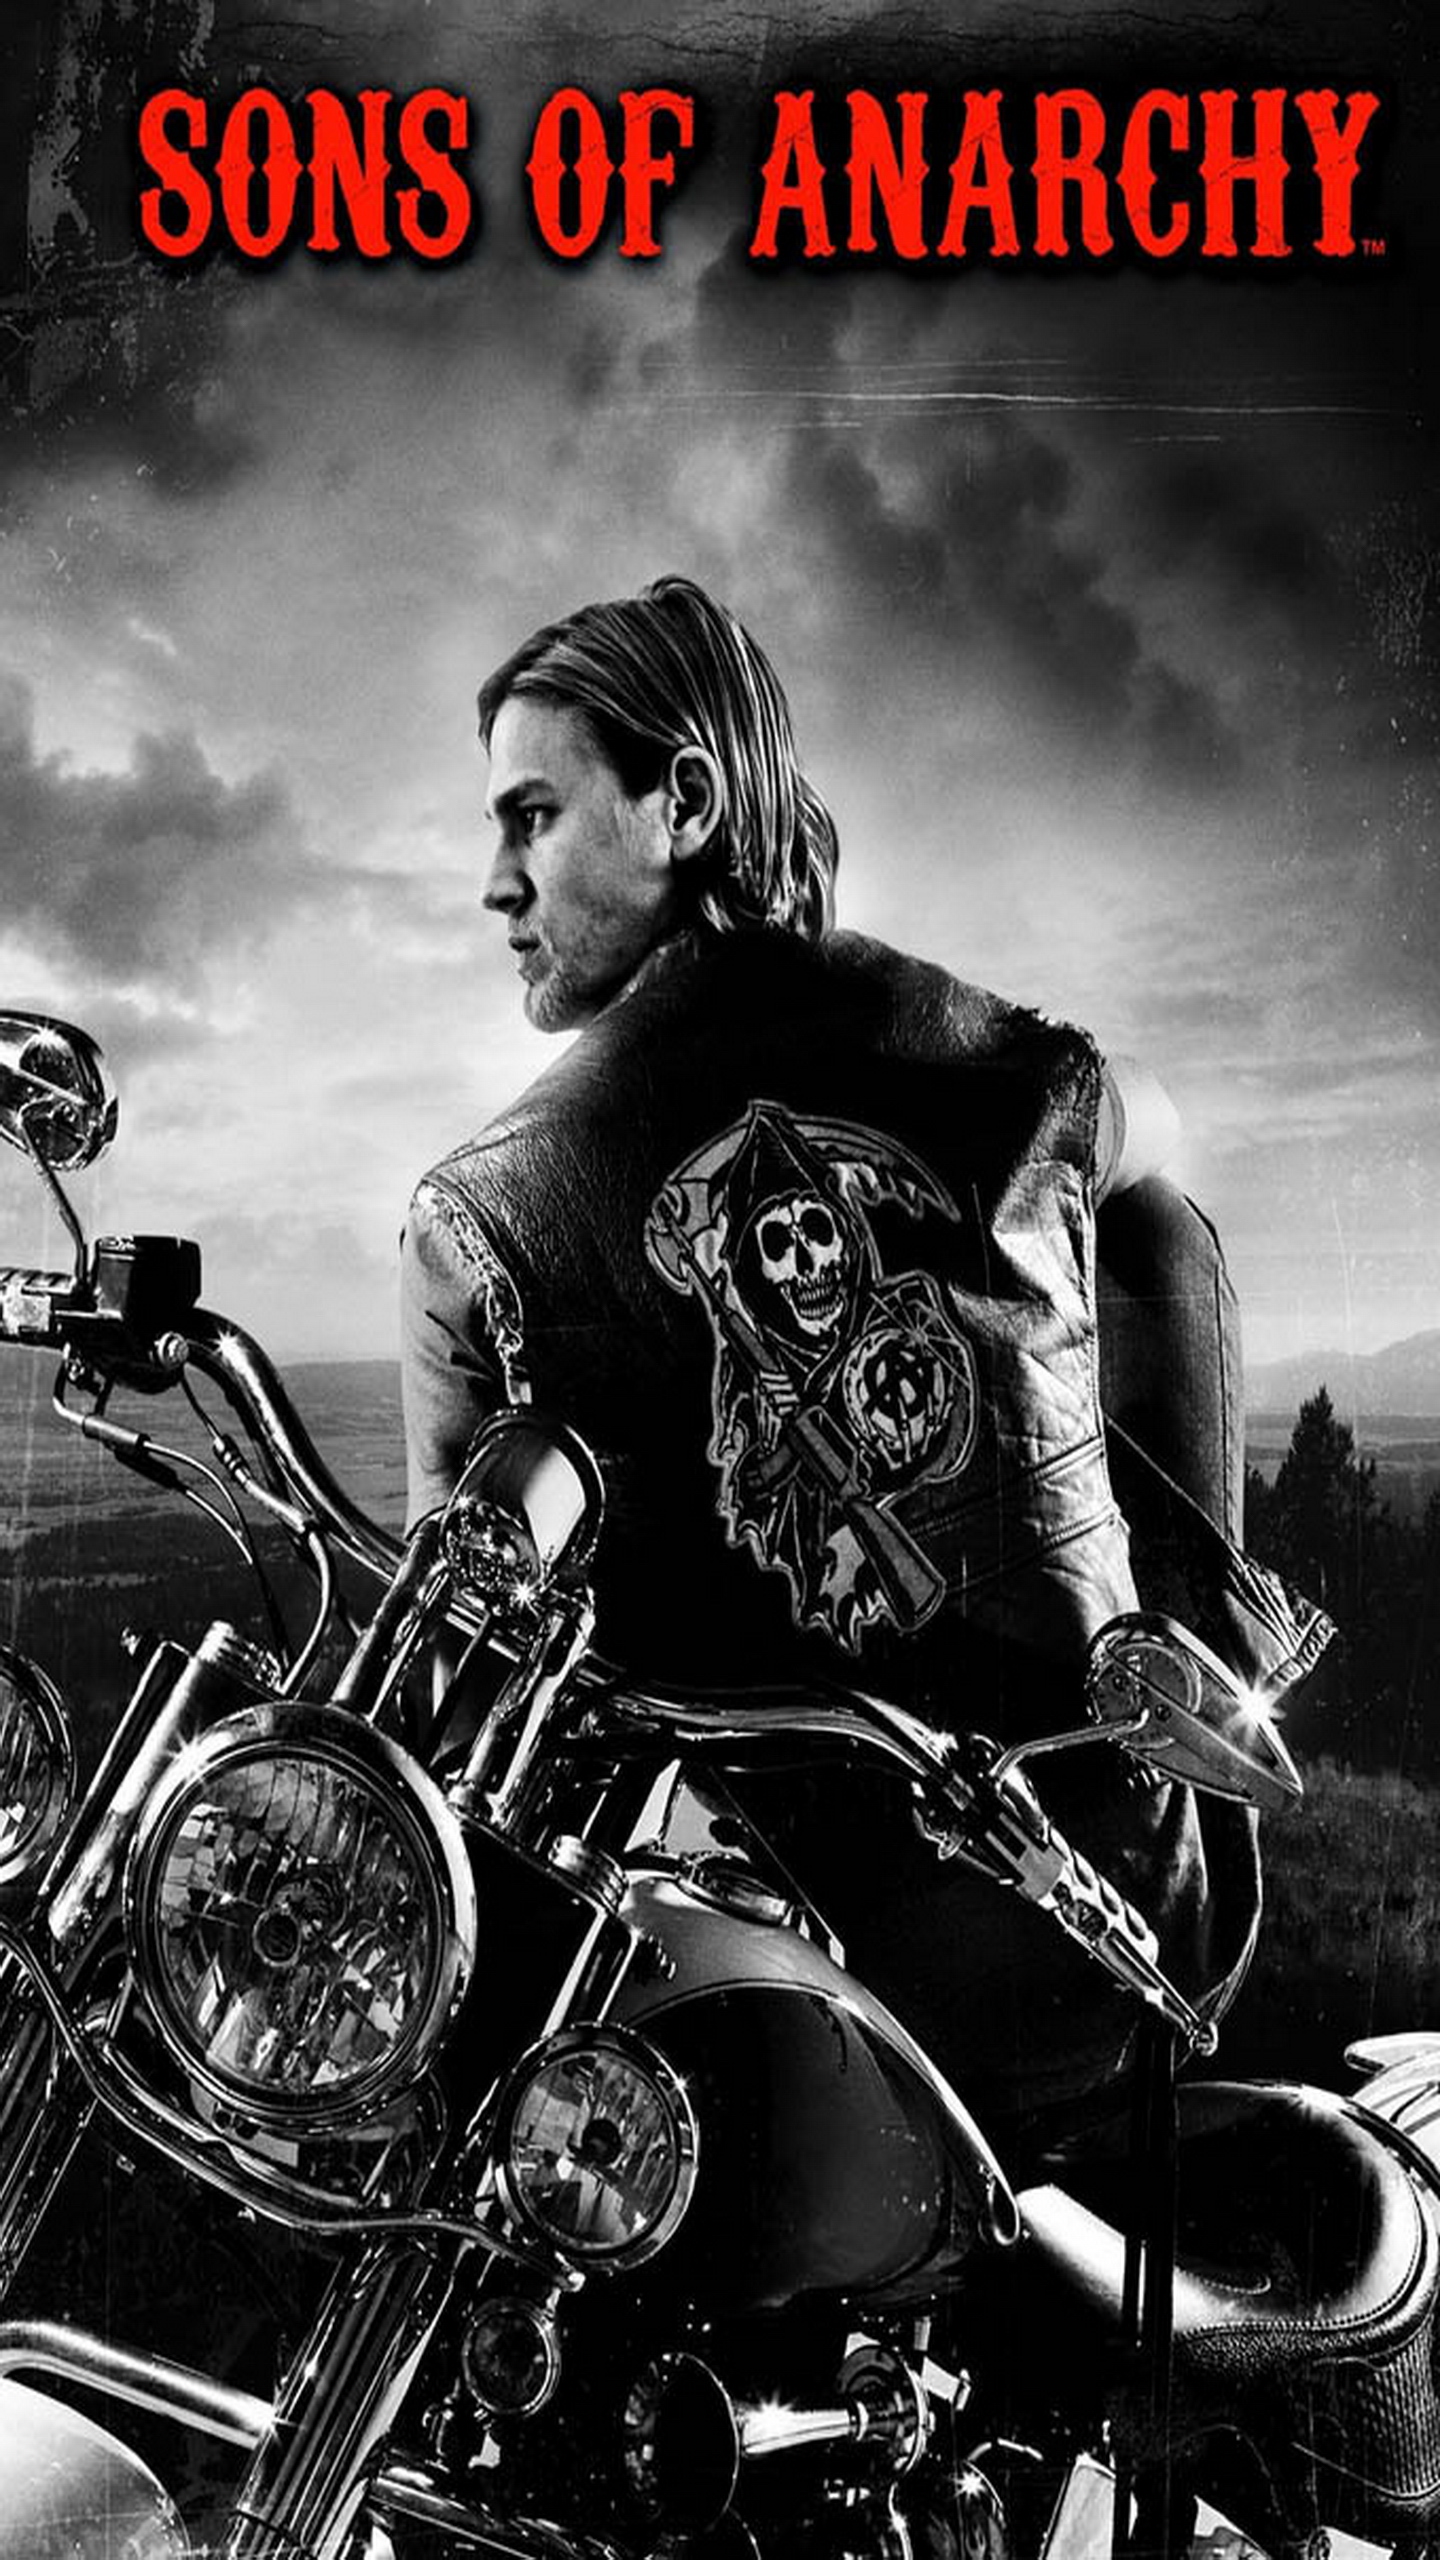 Sons of Anarchy Galaxy Note 4 Wallpaper Quad HD   Wallpapers Galaxy